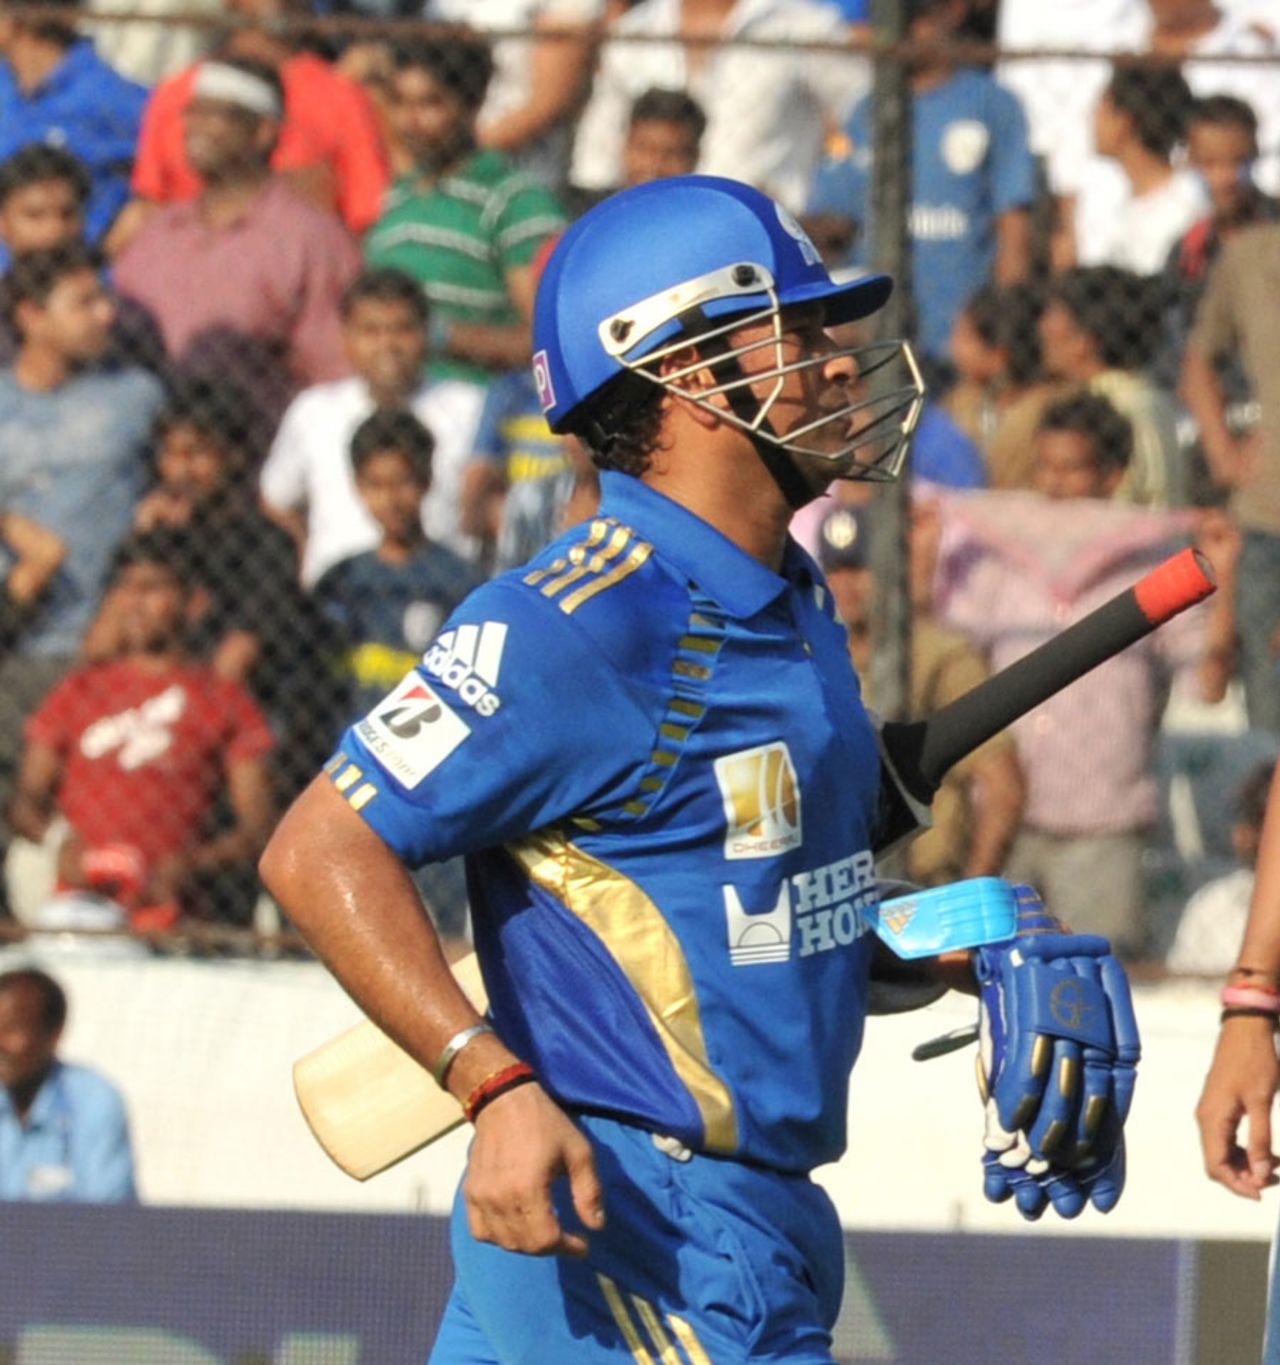 Sachin Tendulkar couldn't make a big score on his birthday, dismissed for 28, Deccan Chargers v Mumbai Indians, IPL 2011, Hyderabad, April 24, 2011